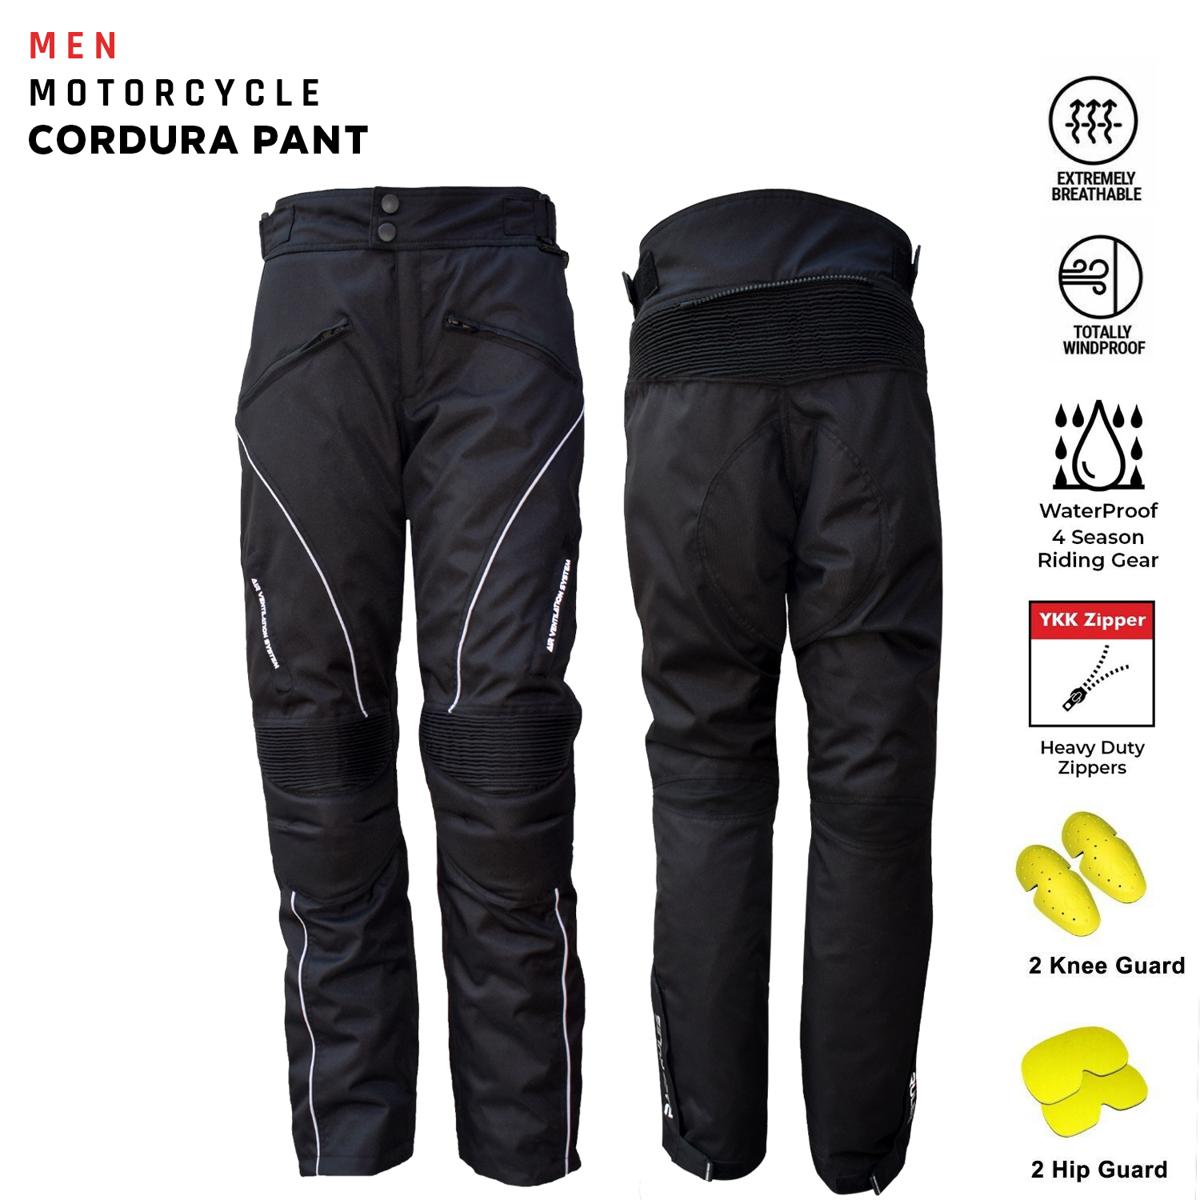 Motorcycle Trousers or Jeans? The Best Styles for Safety and Comfort -  Phoenix Motorcycle Training